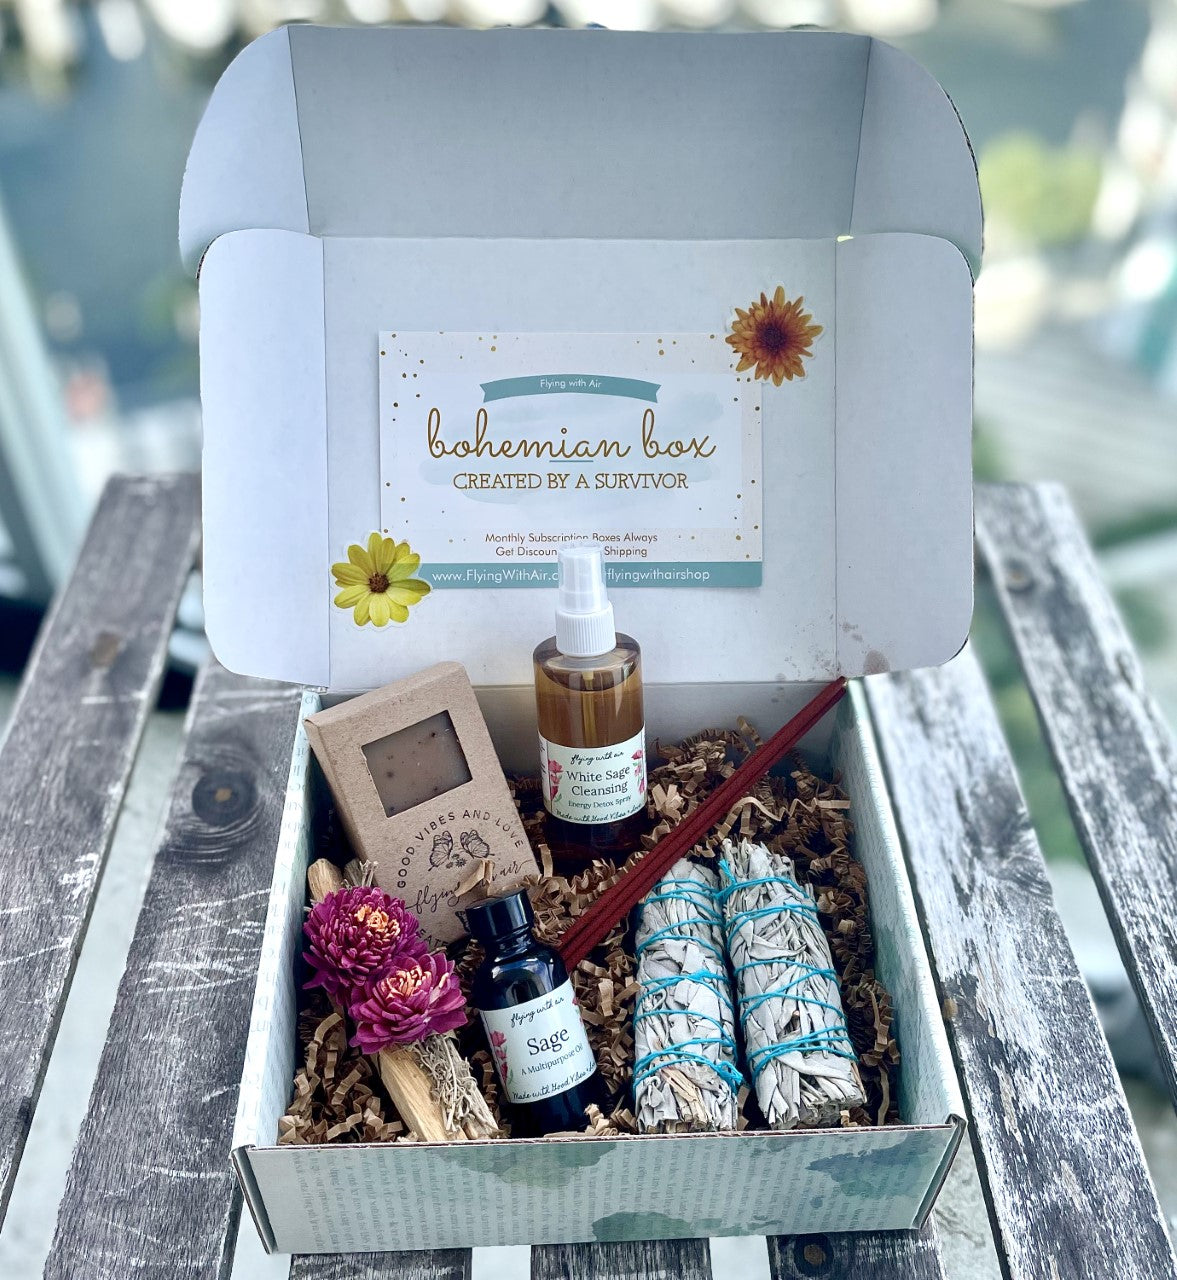 sage and purification white sage oil gift box